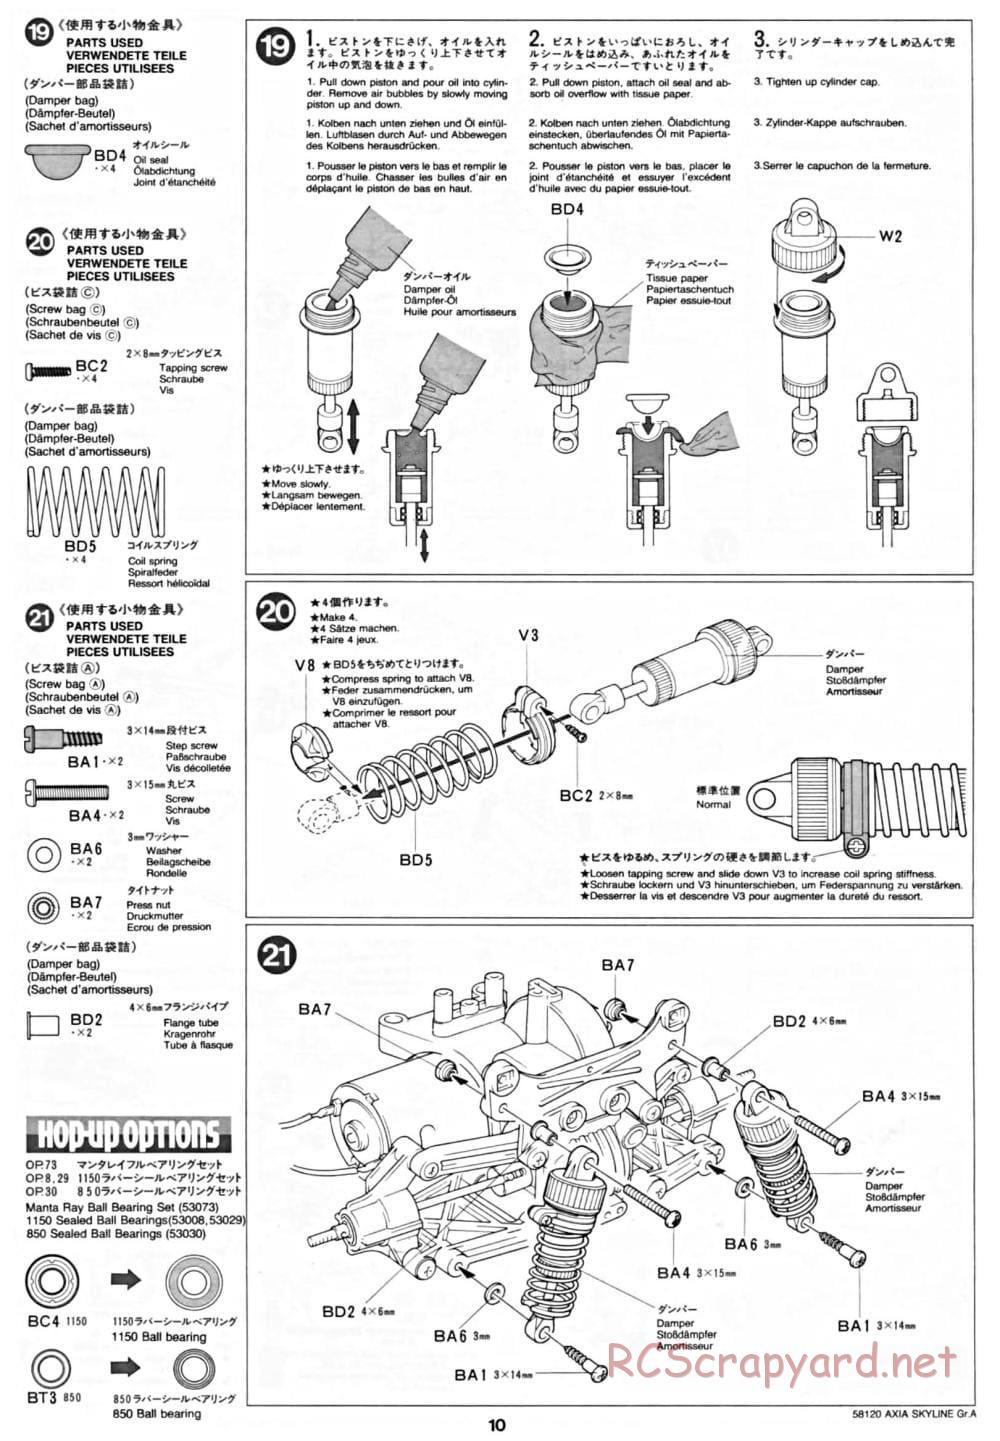 Tamiya - Axia Skyline GT-R Gr.A - TA-01 Chassis - Manual - Page 10